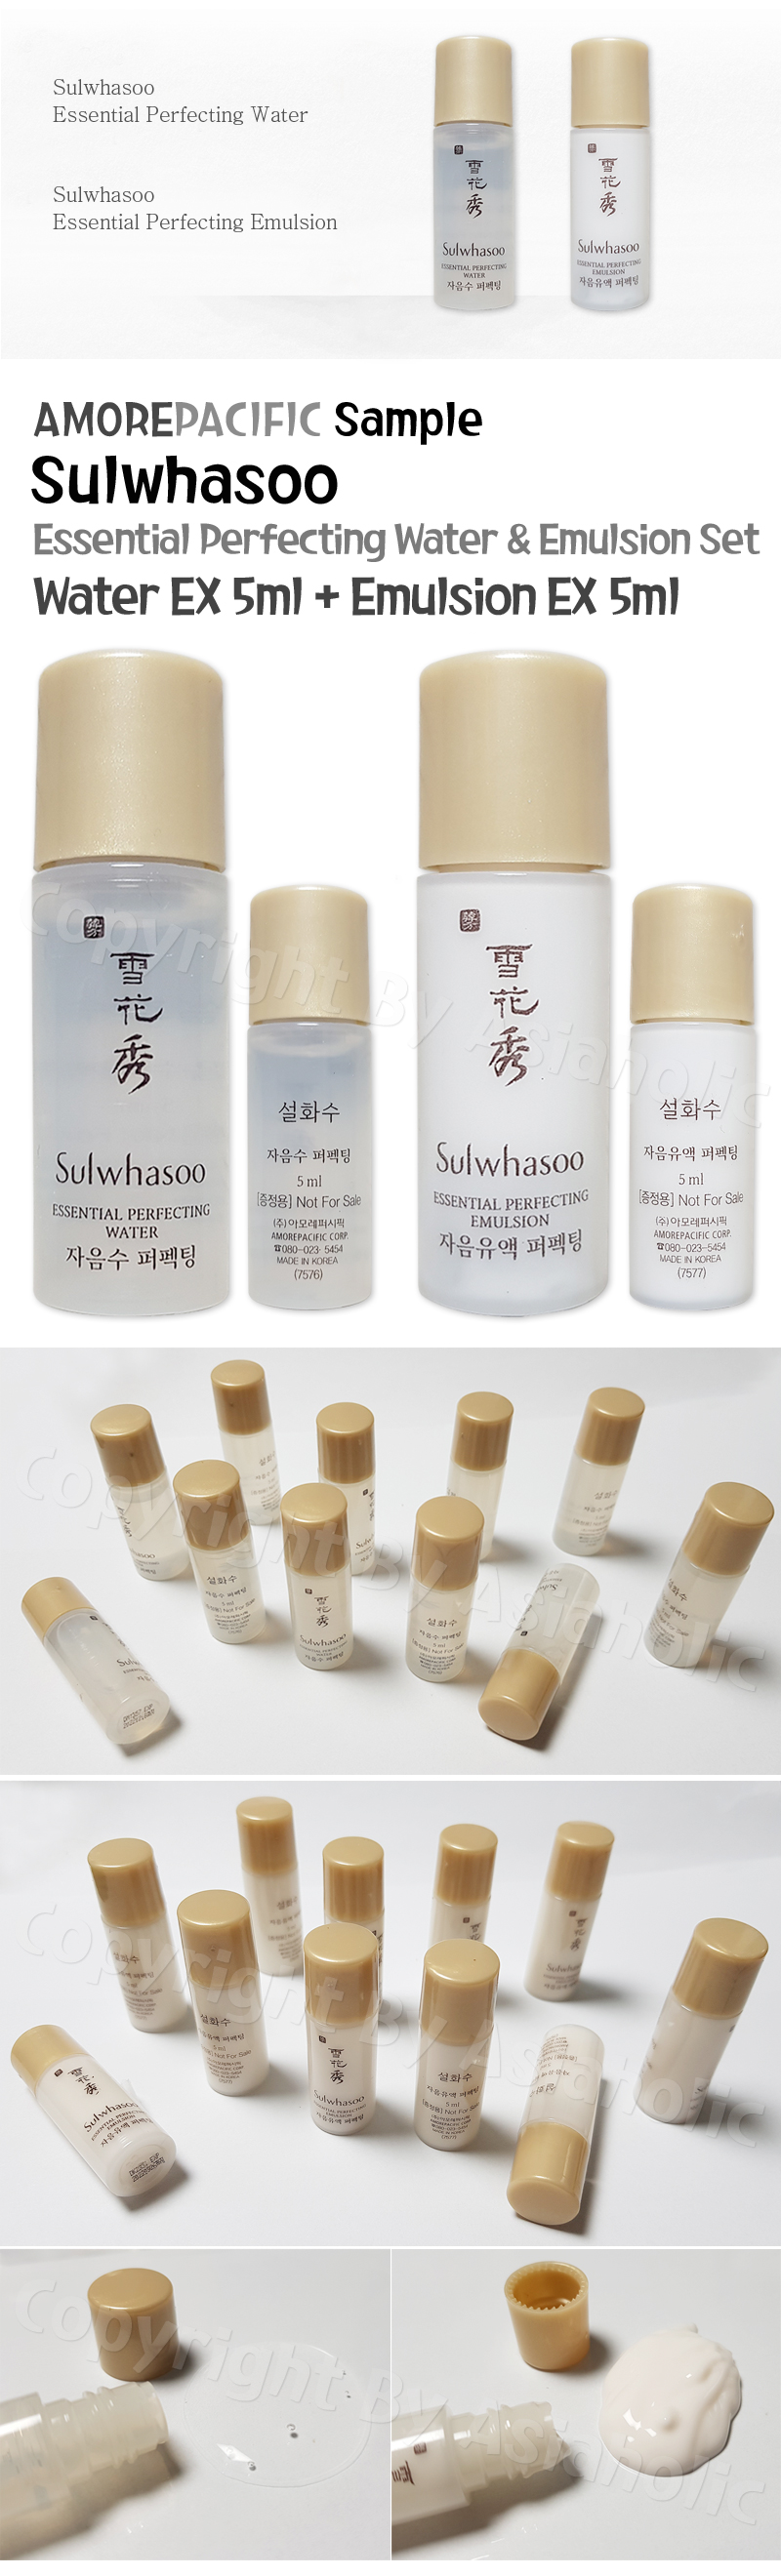 Sulwhasoo Essential Perfecting 5ml Water (10pcs) + Emulsion (10pcs) 20pcs Newest Version